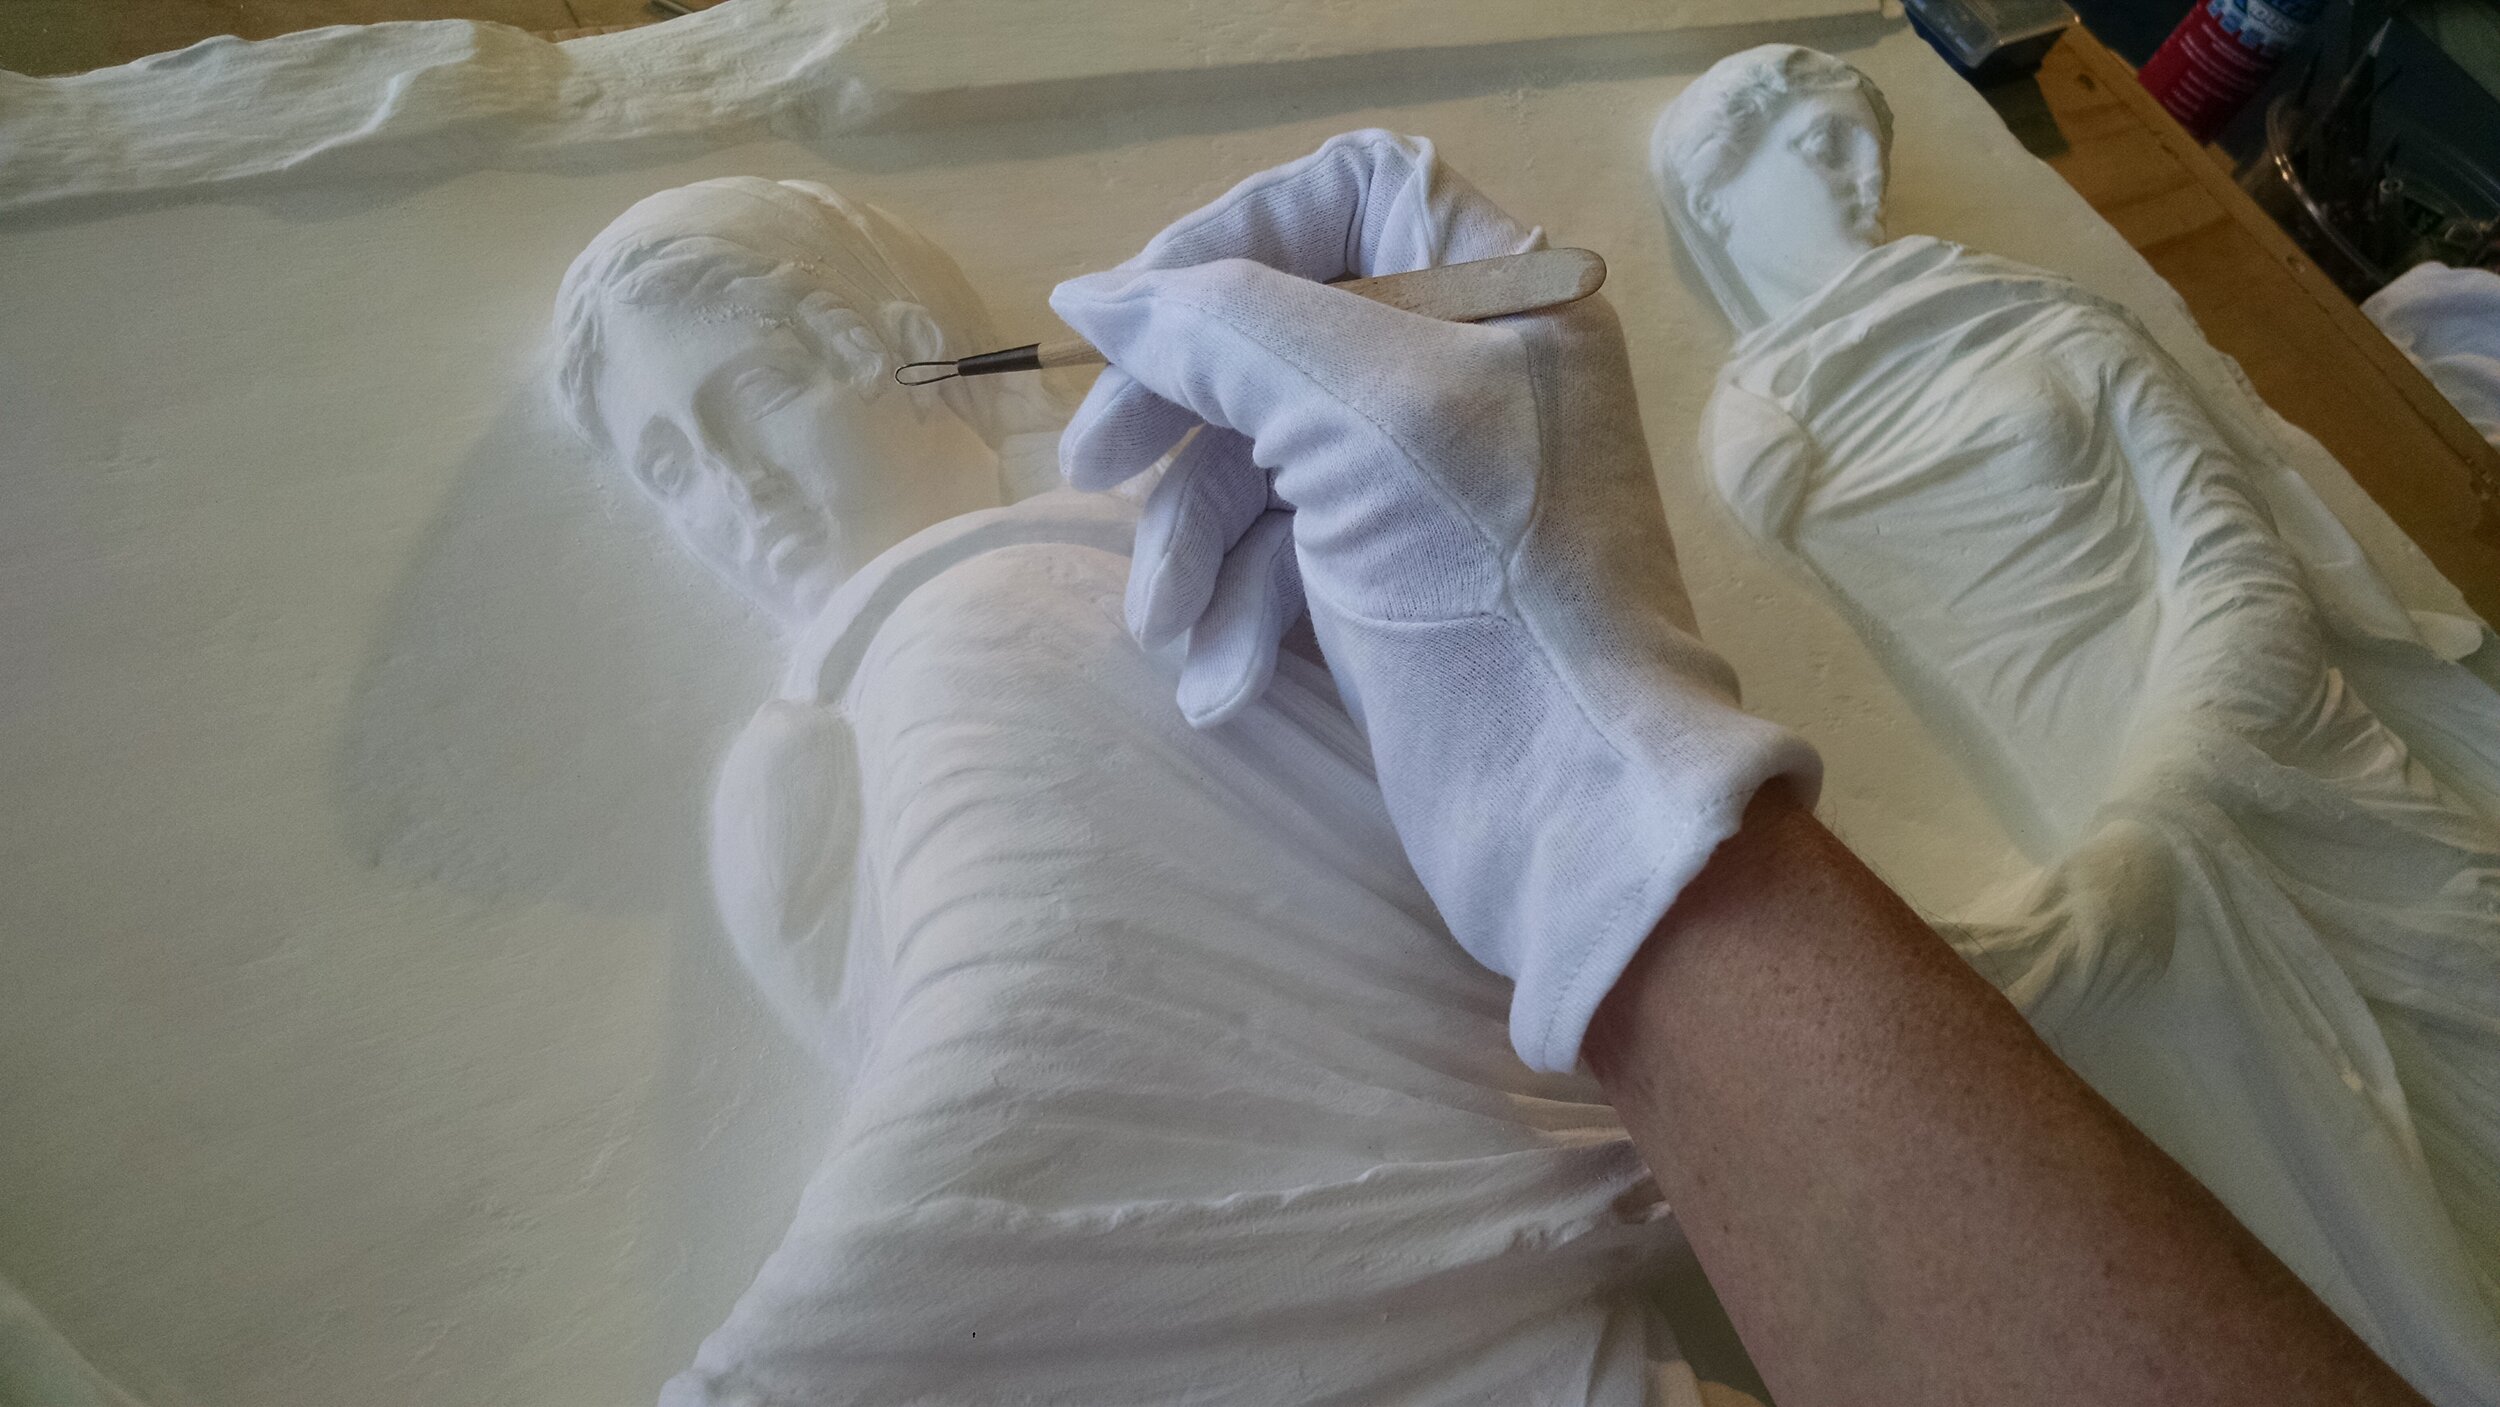   Refining the milled plaster’s details by hand  